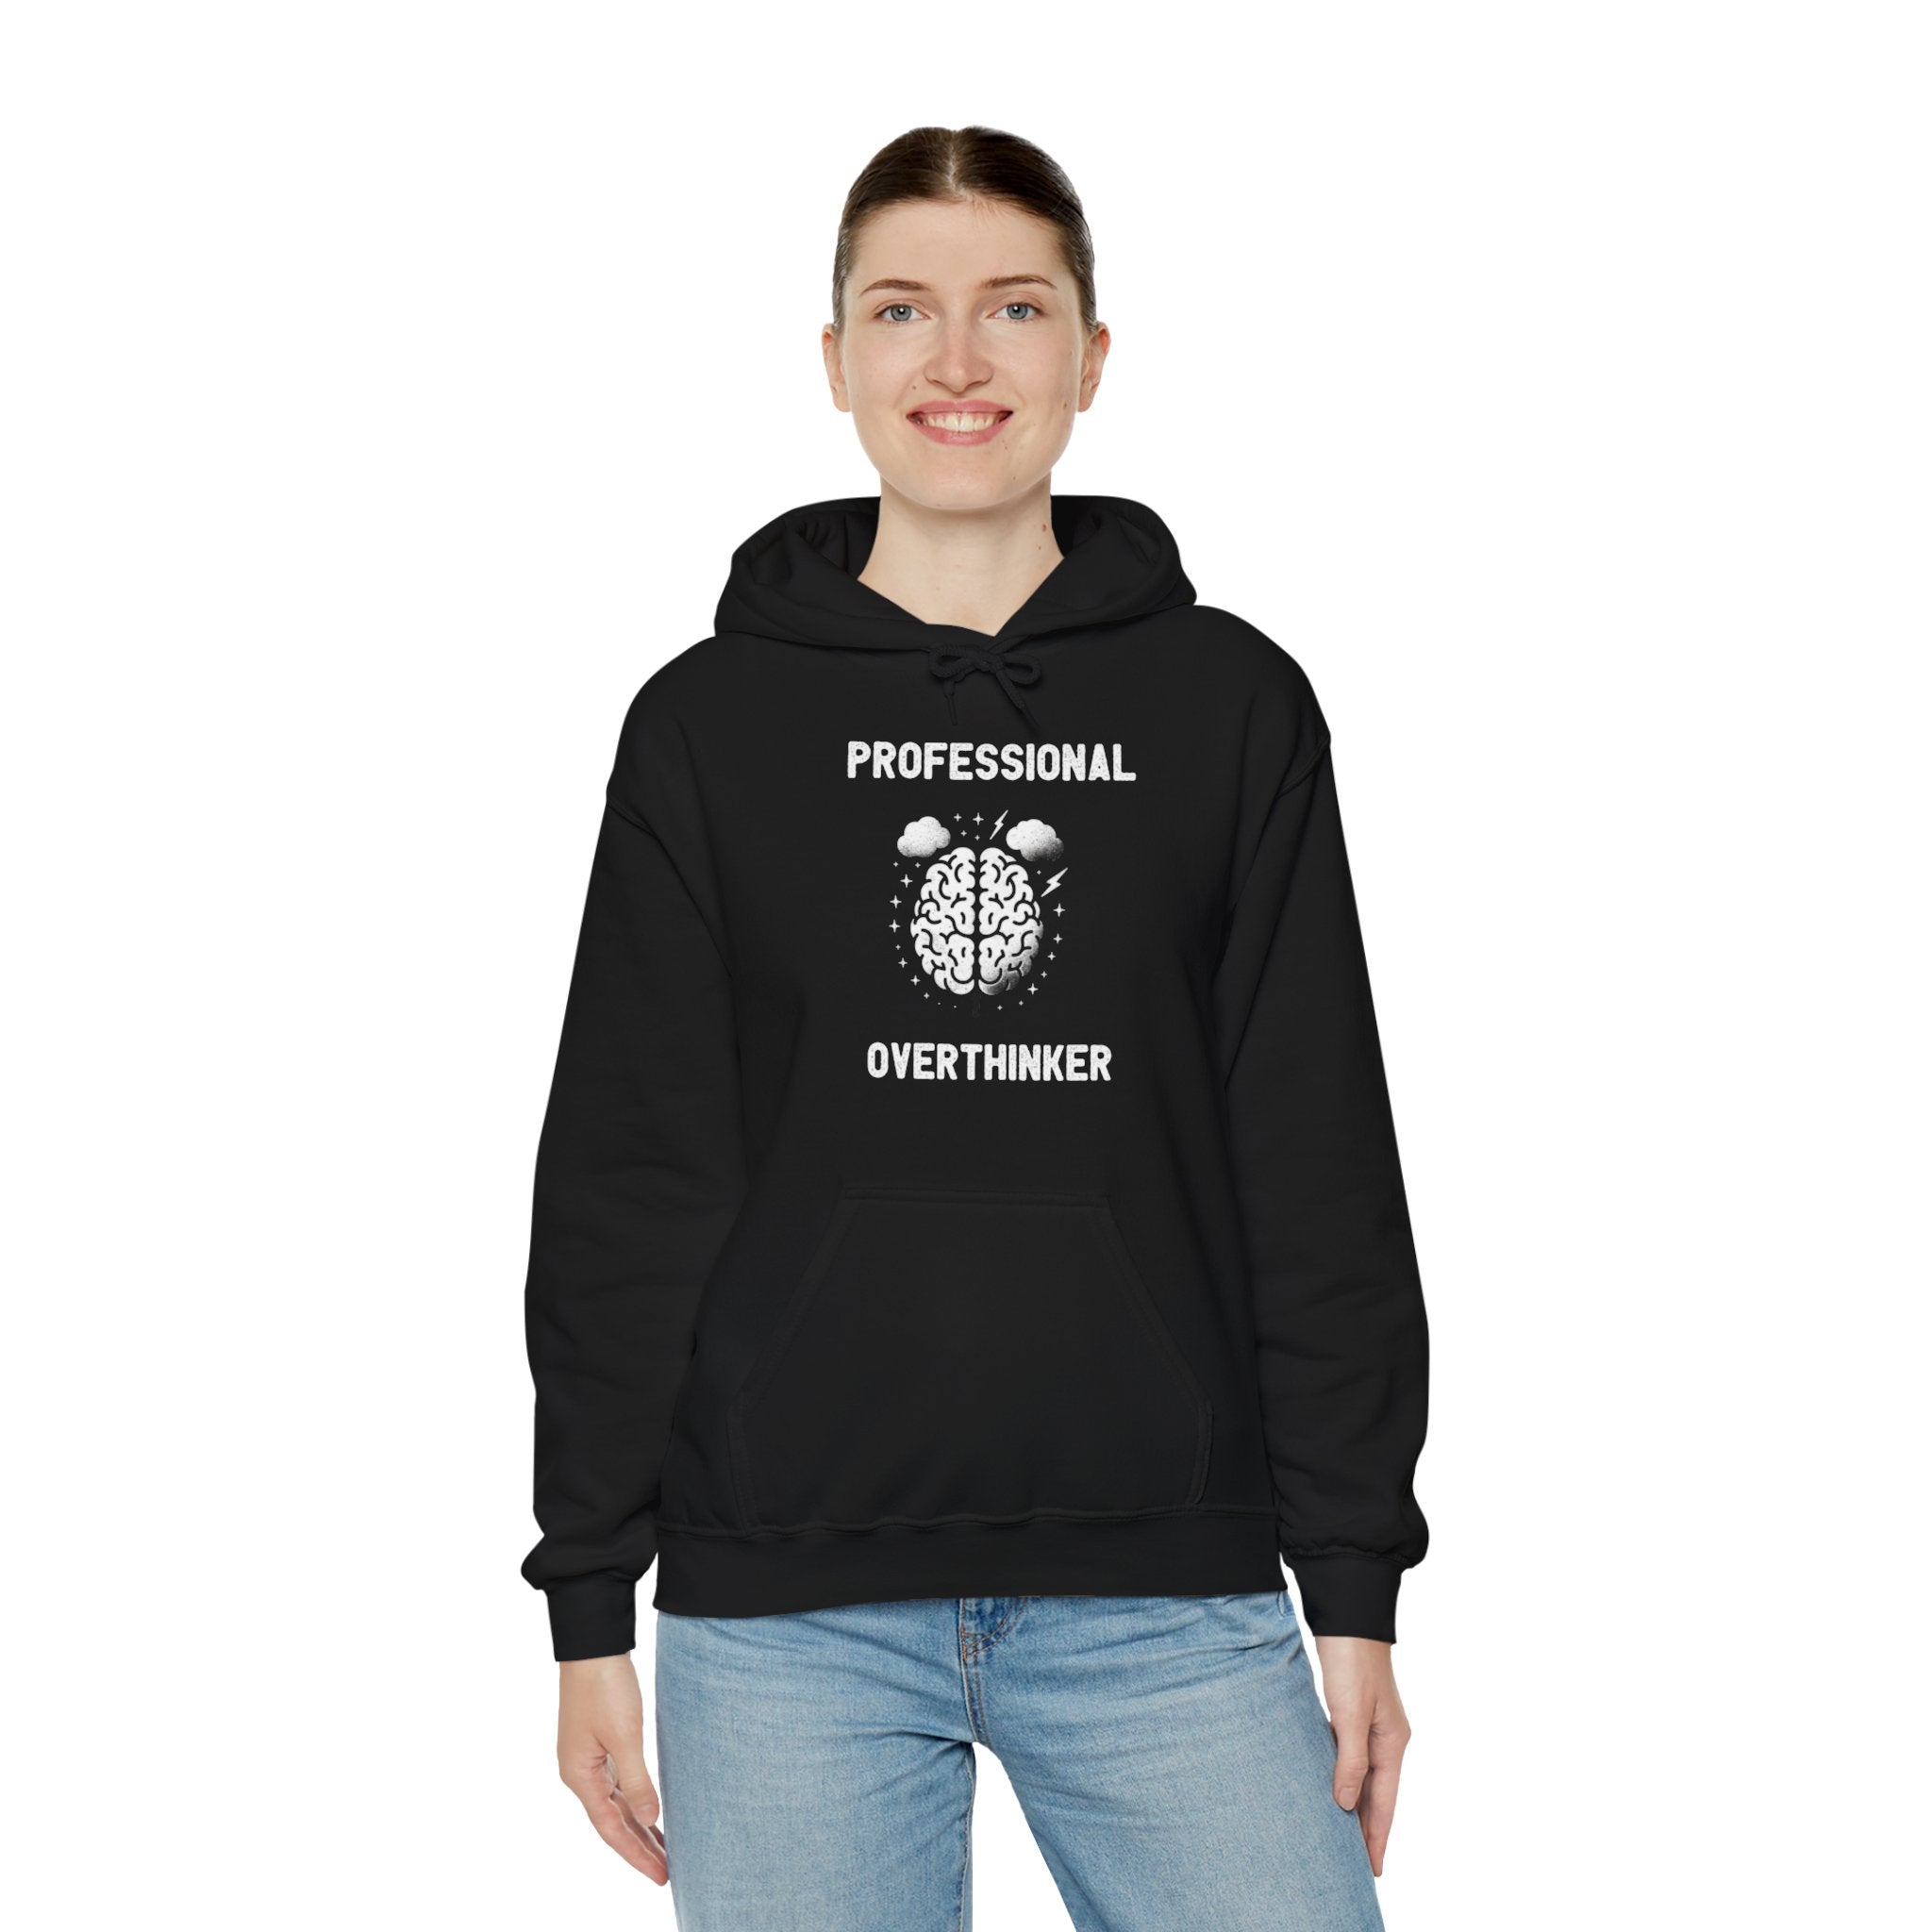 A person wearing a black **Professional Overthinker - Hooded Sweatshirt** that reads "Professional Overthinker" above and below a brain graphic, smiling and standing against a white background. The casual fashion effortlessly captures the thoughtful vibe.